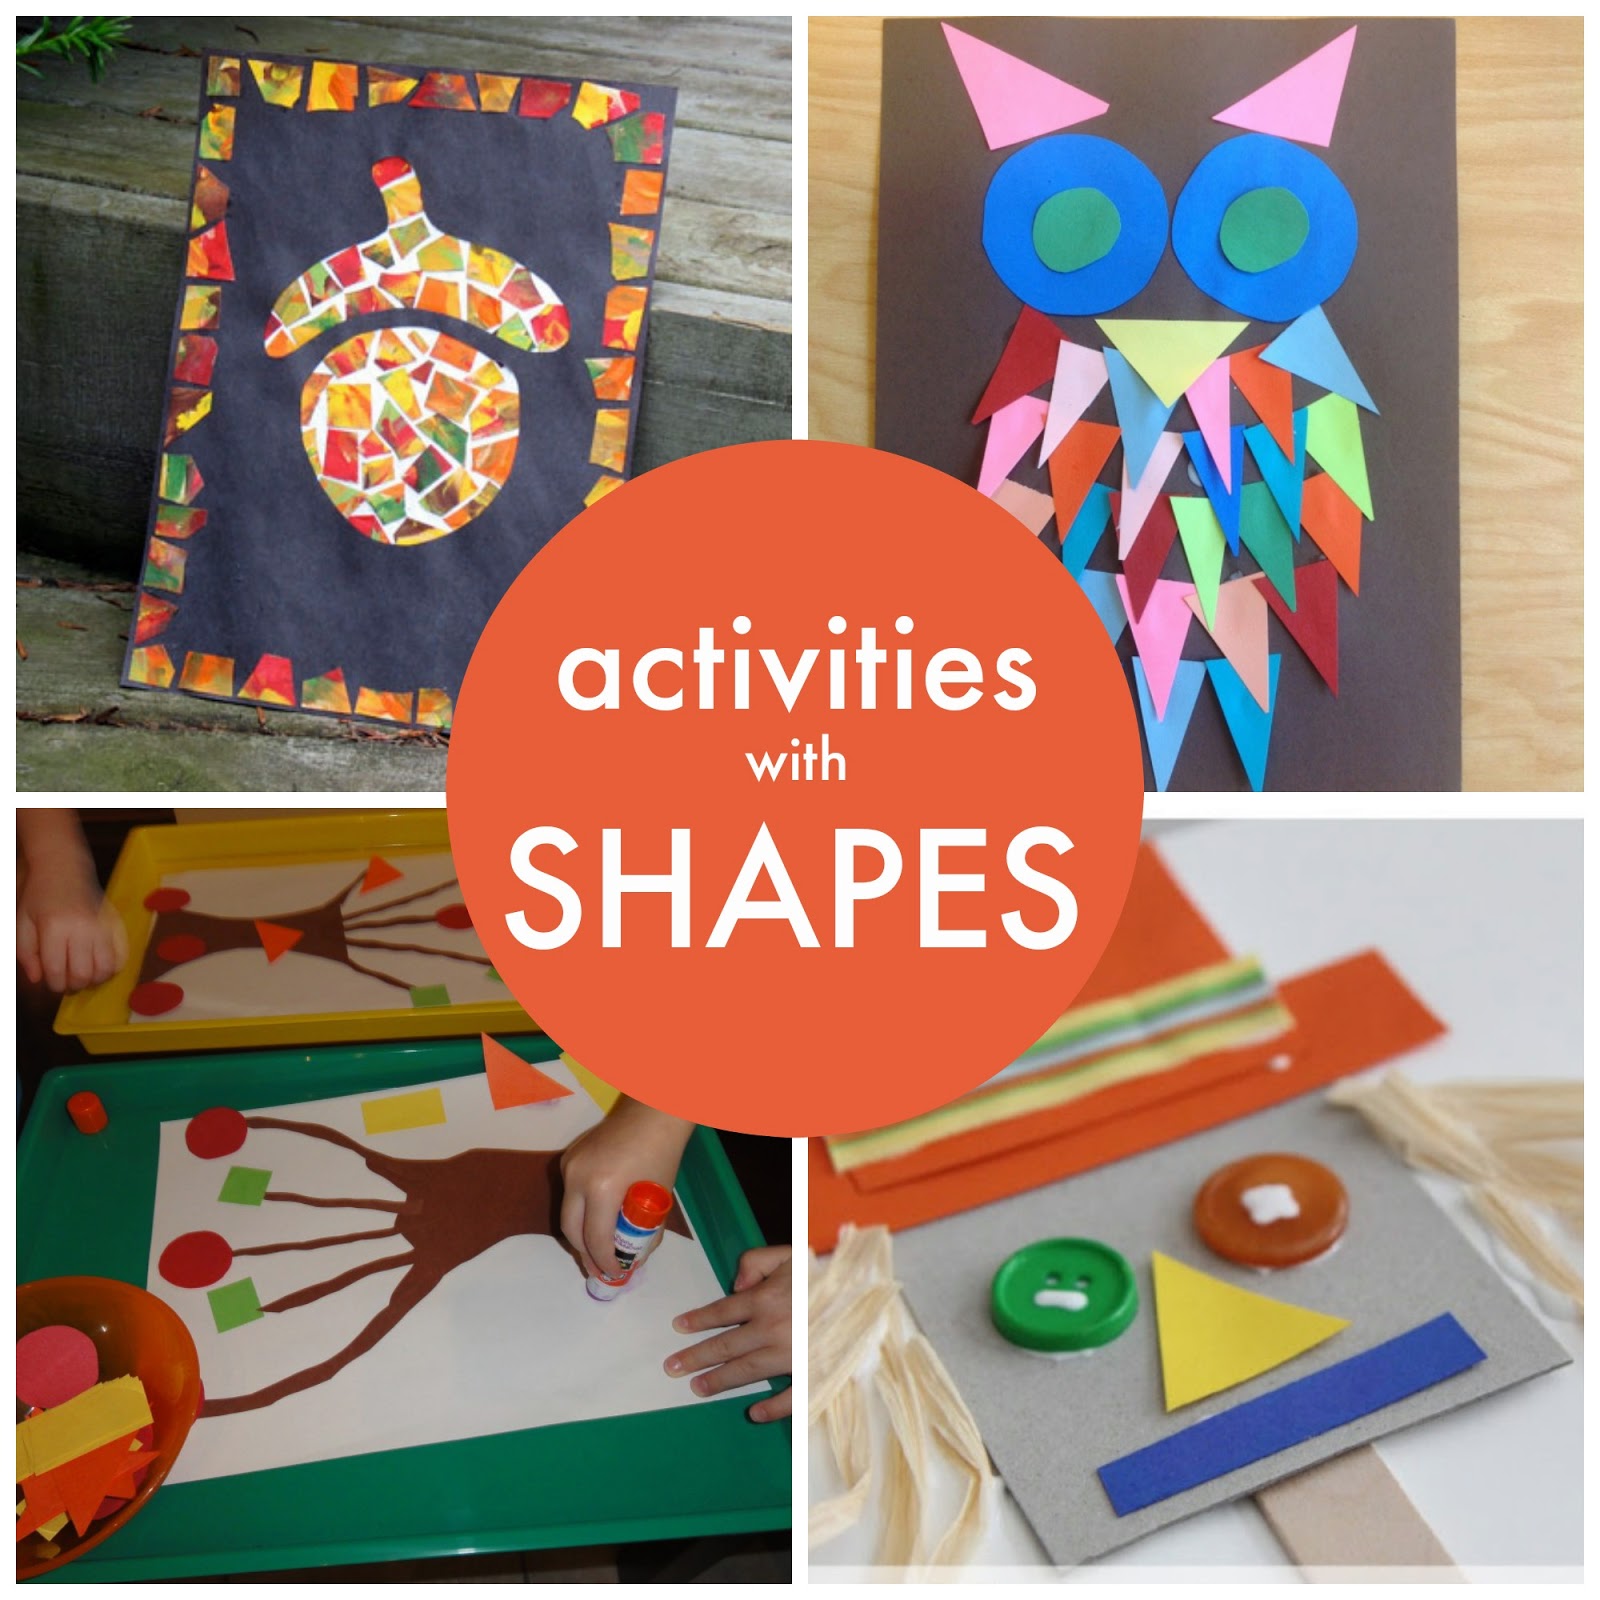 Toddler Approved!: 20 Fall Learning Activities for Preschoolers